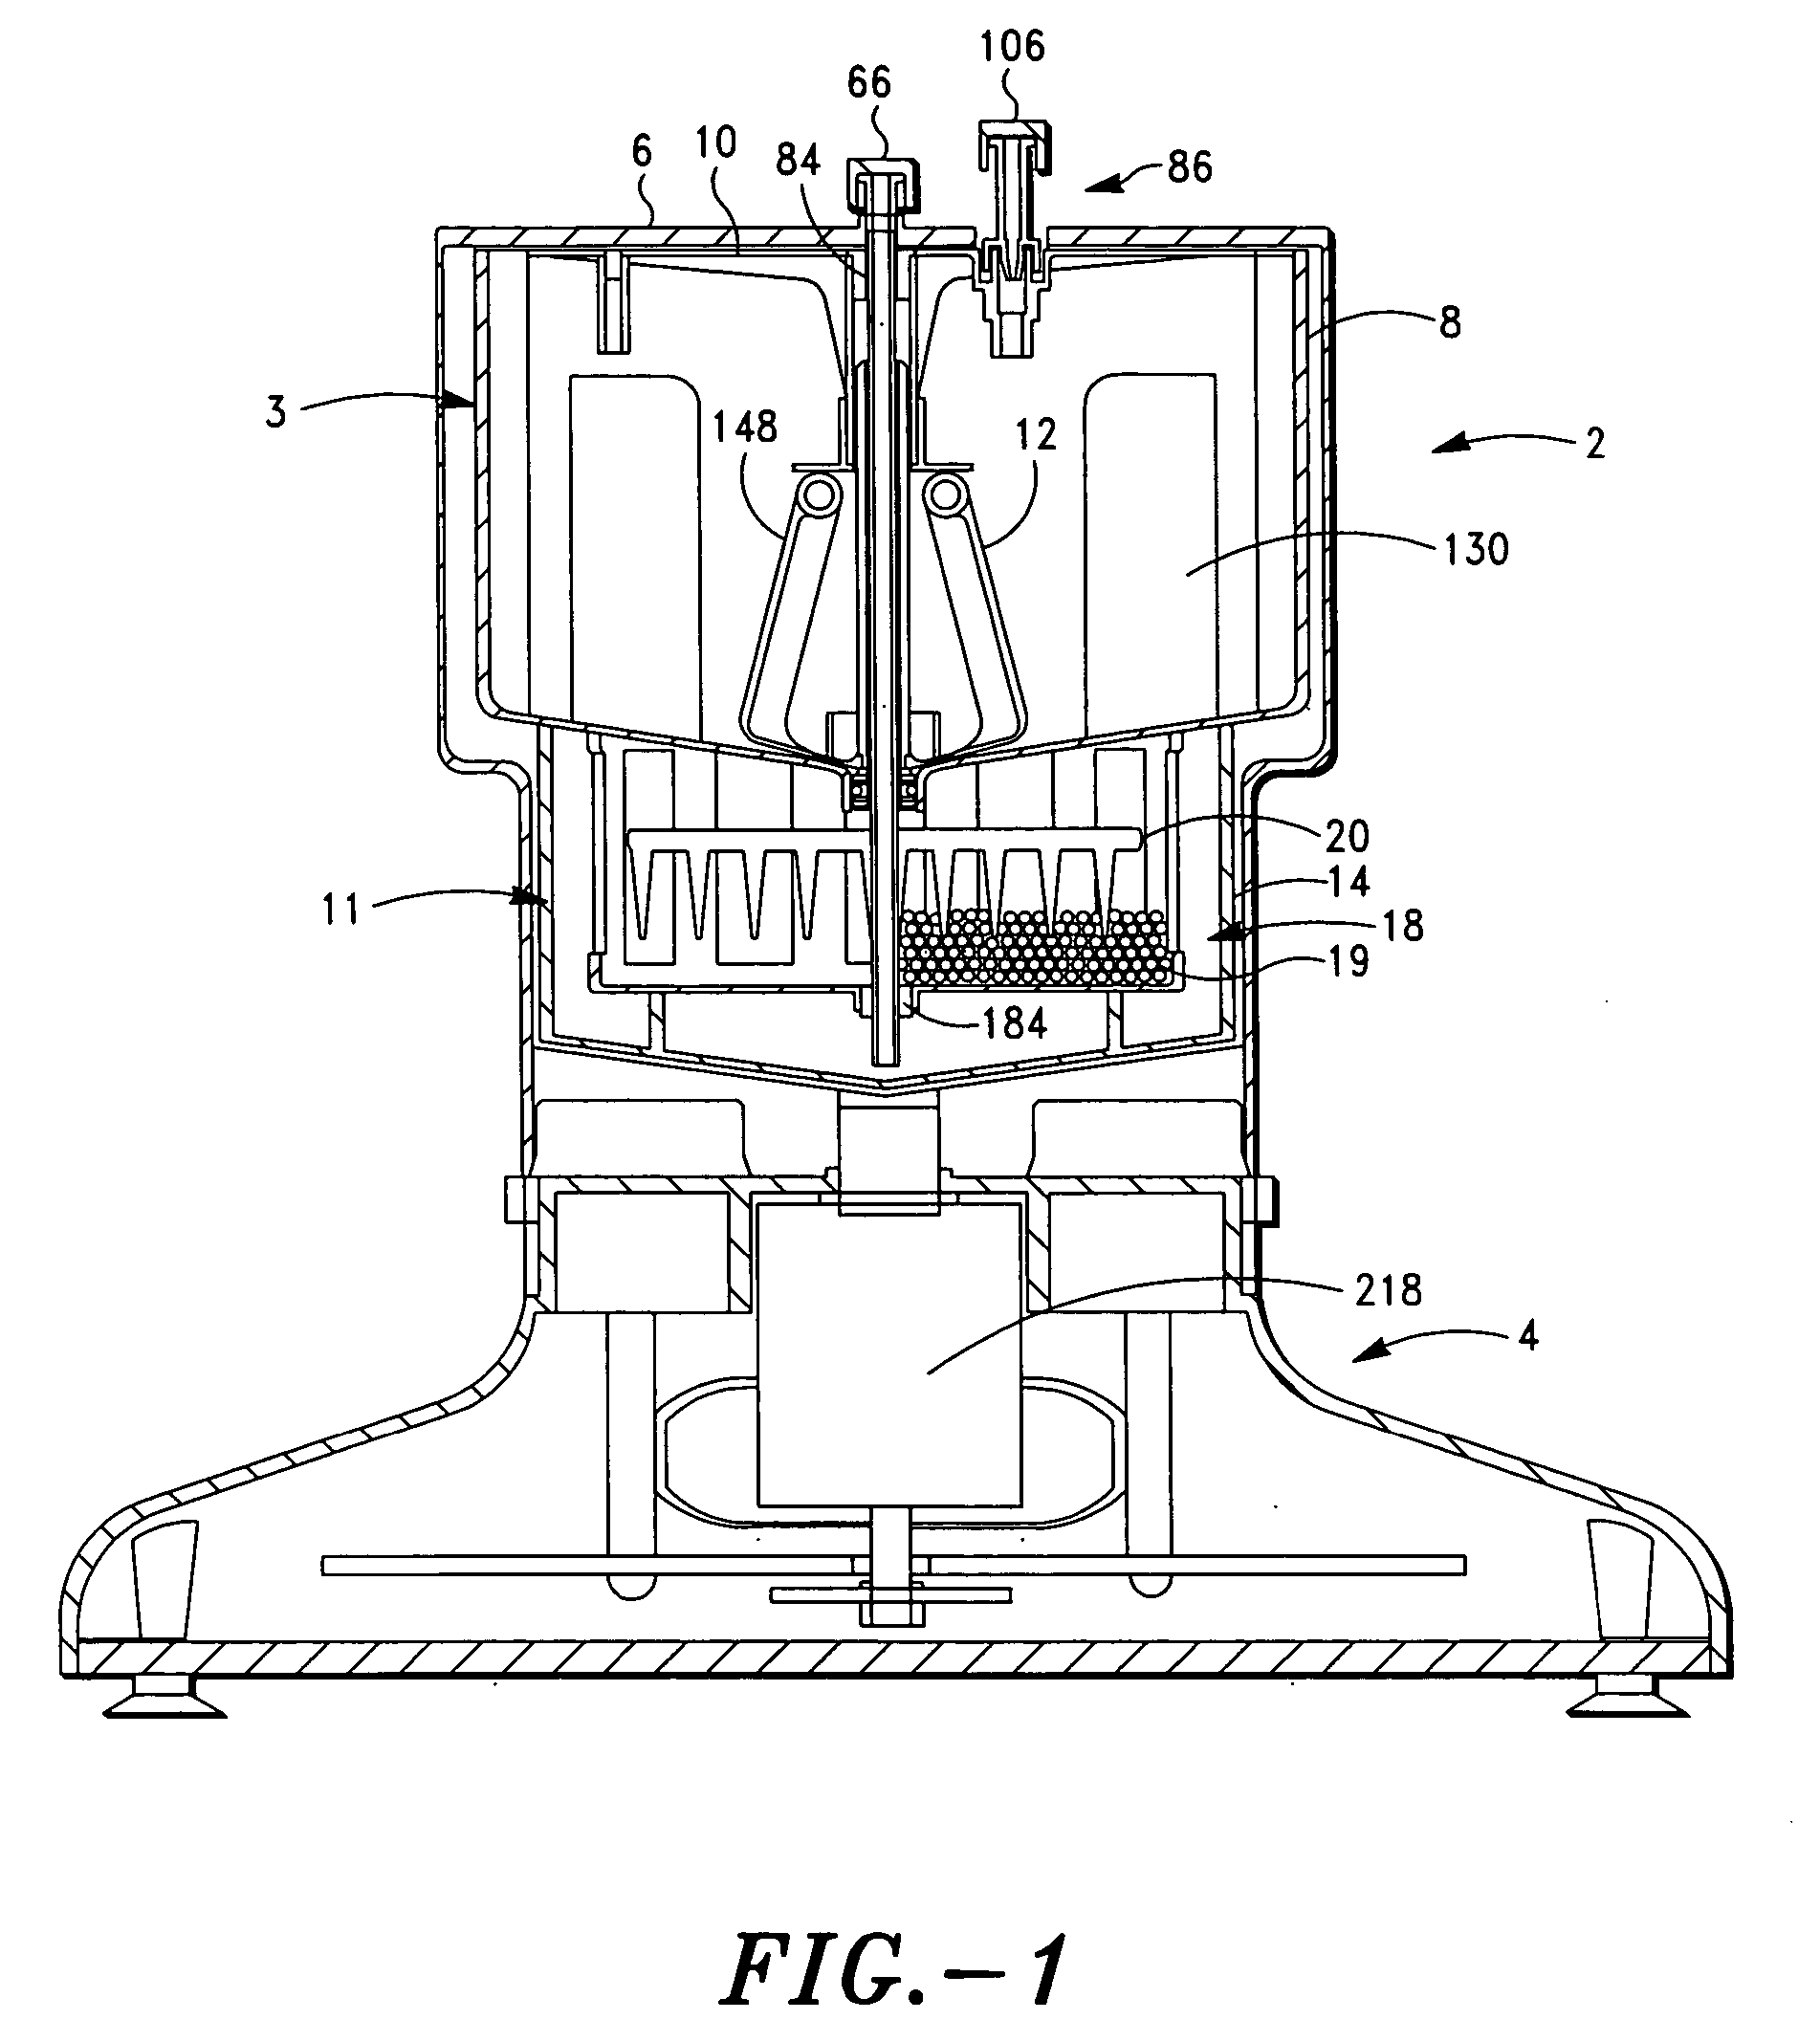 Apparatus and method for preparing platelet rich plasma and concentrates thereof